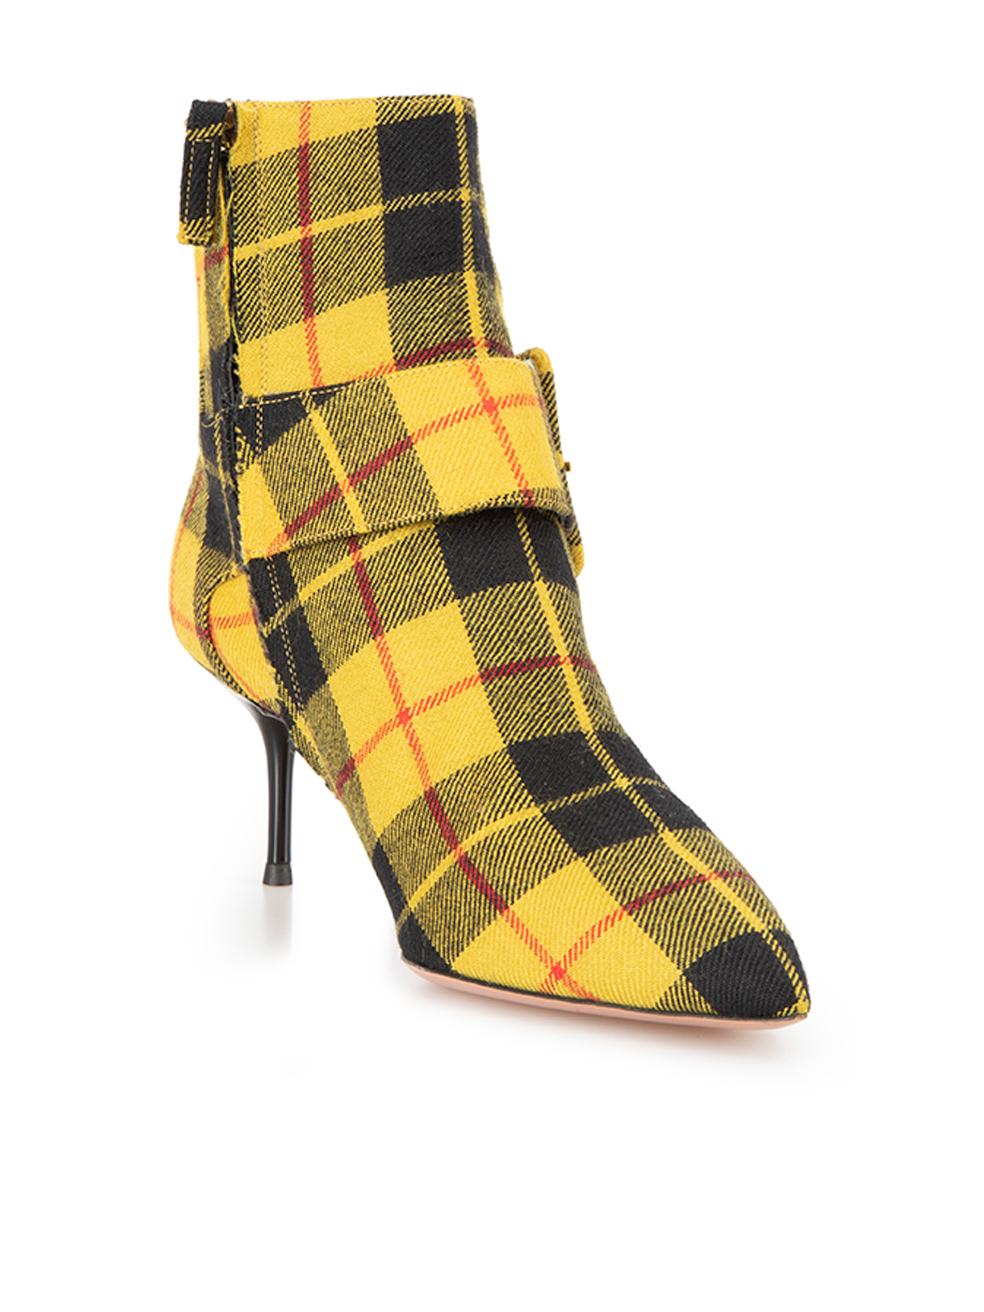 CONDITION is Very good. Hardly any visible wear to boots is evident on this used Aquazurra designer resale item. This item includes the original dustbag and shoes box.



Details


Yellow tartan/check print

Cloth

Low heel/kitten

Pointed toe

Side